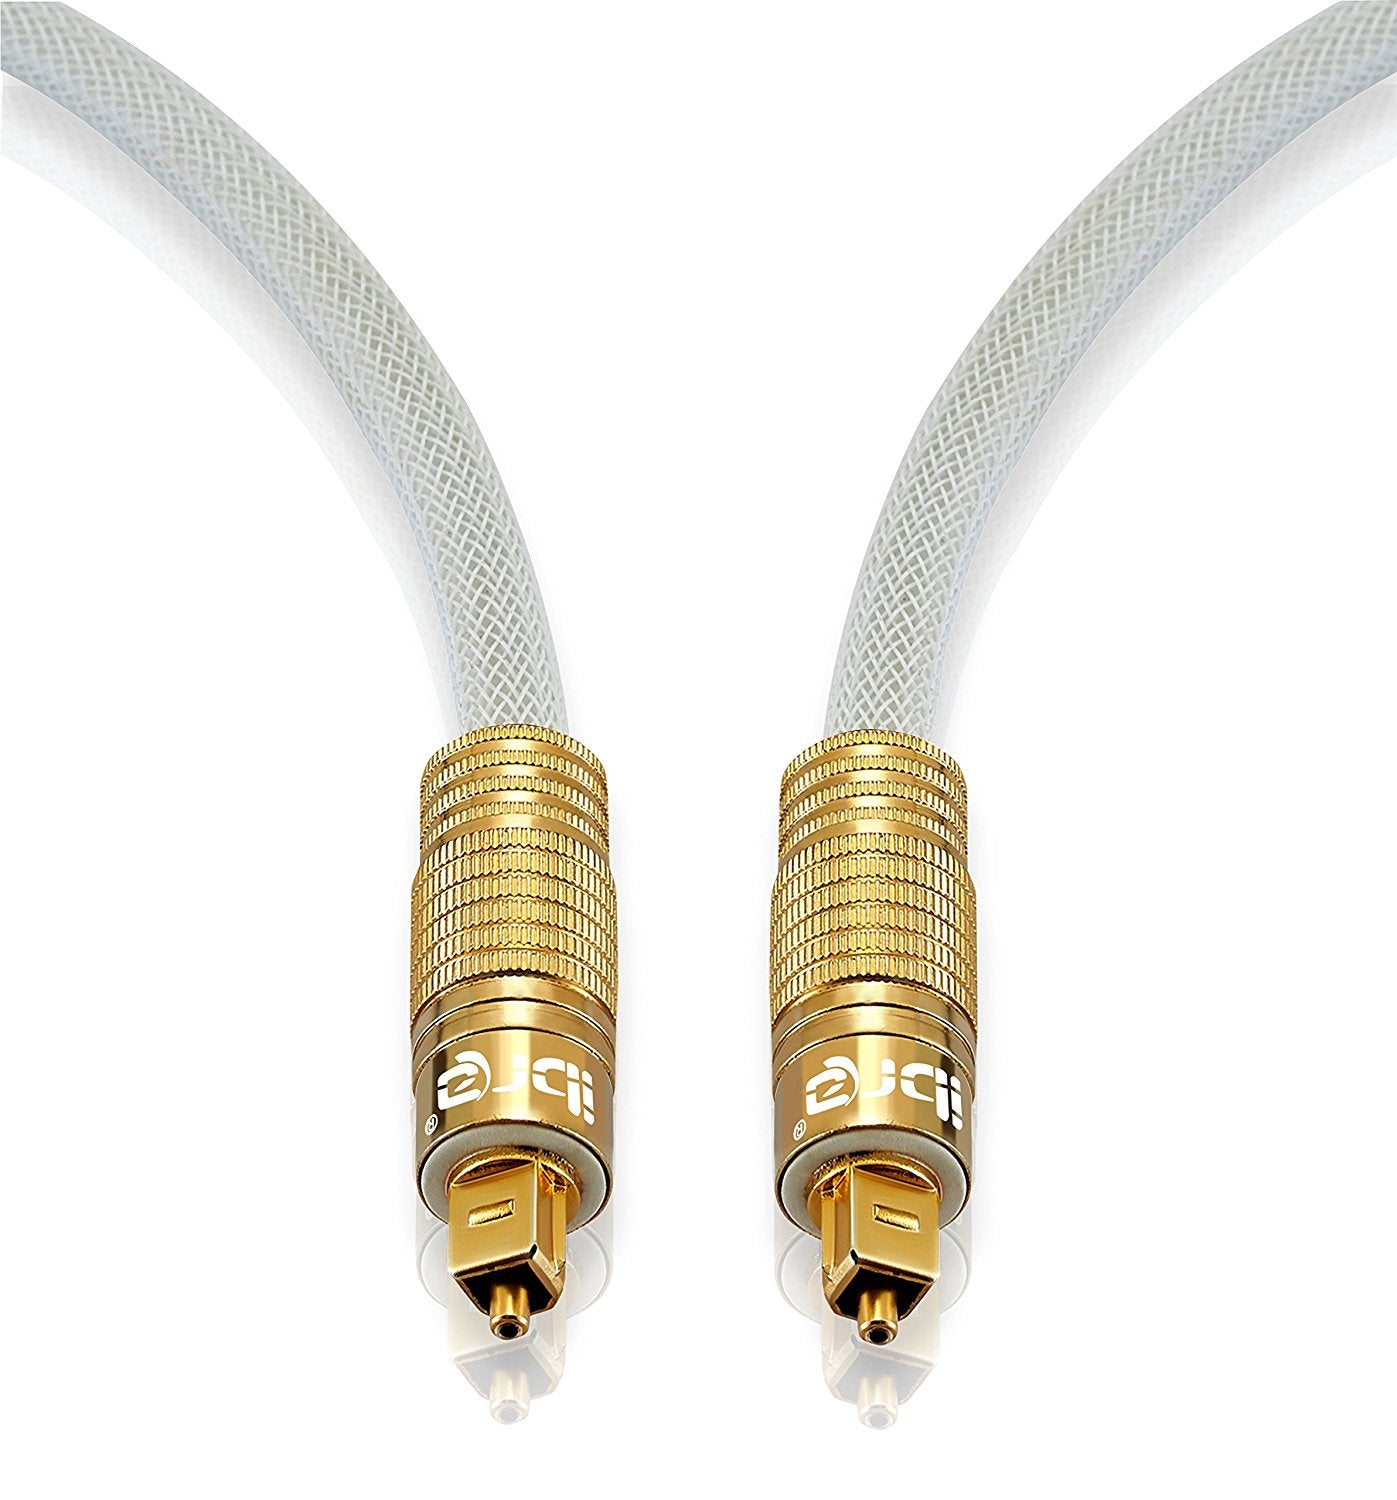 Optical Toslink Digital Audio Cable - 24k Gold Casing - Suitable for PS3,Sky,Sky HD,LCD,LED,Plasma, Blu Ray to Connect with Home Cinema Systems,AV Amps - 1.5M - IBRA PREMIUM WHITE